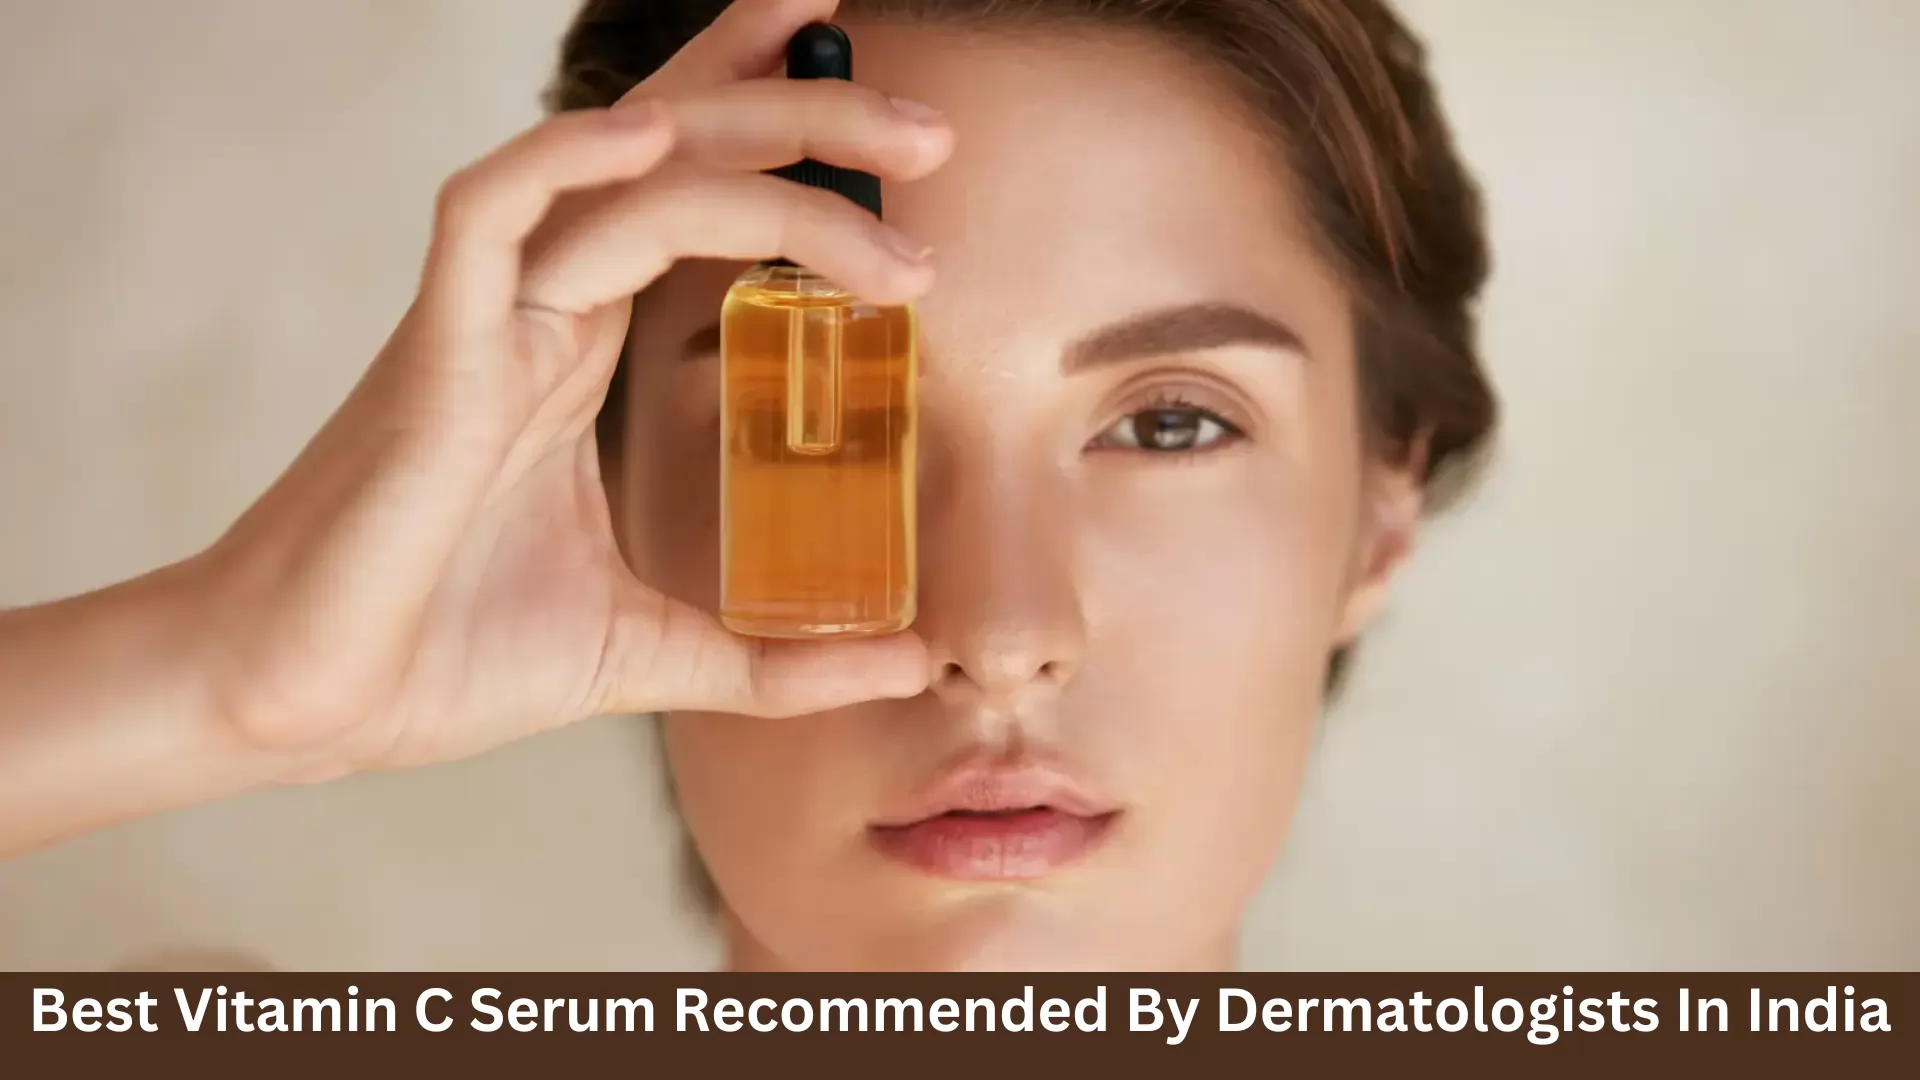 Best Vitamin C Serum Recommended By Dermatologists In India